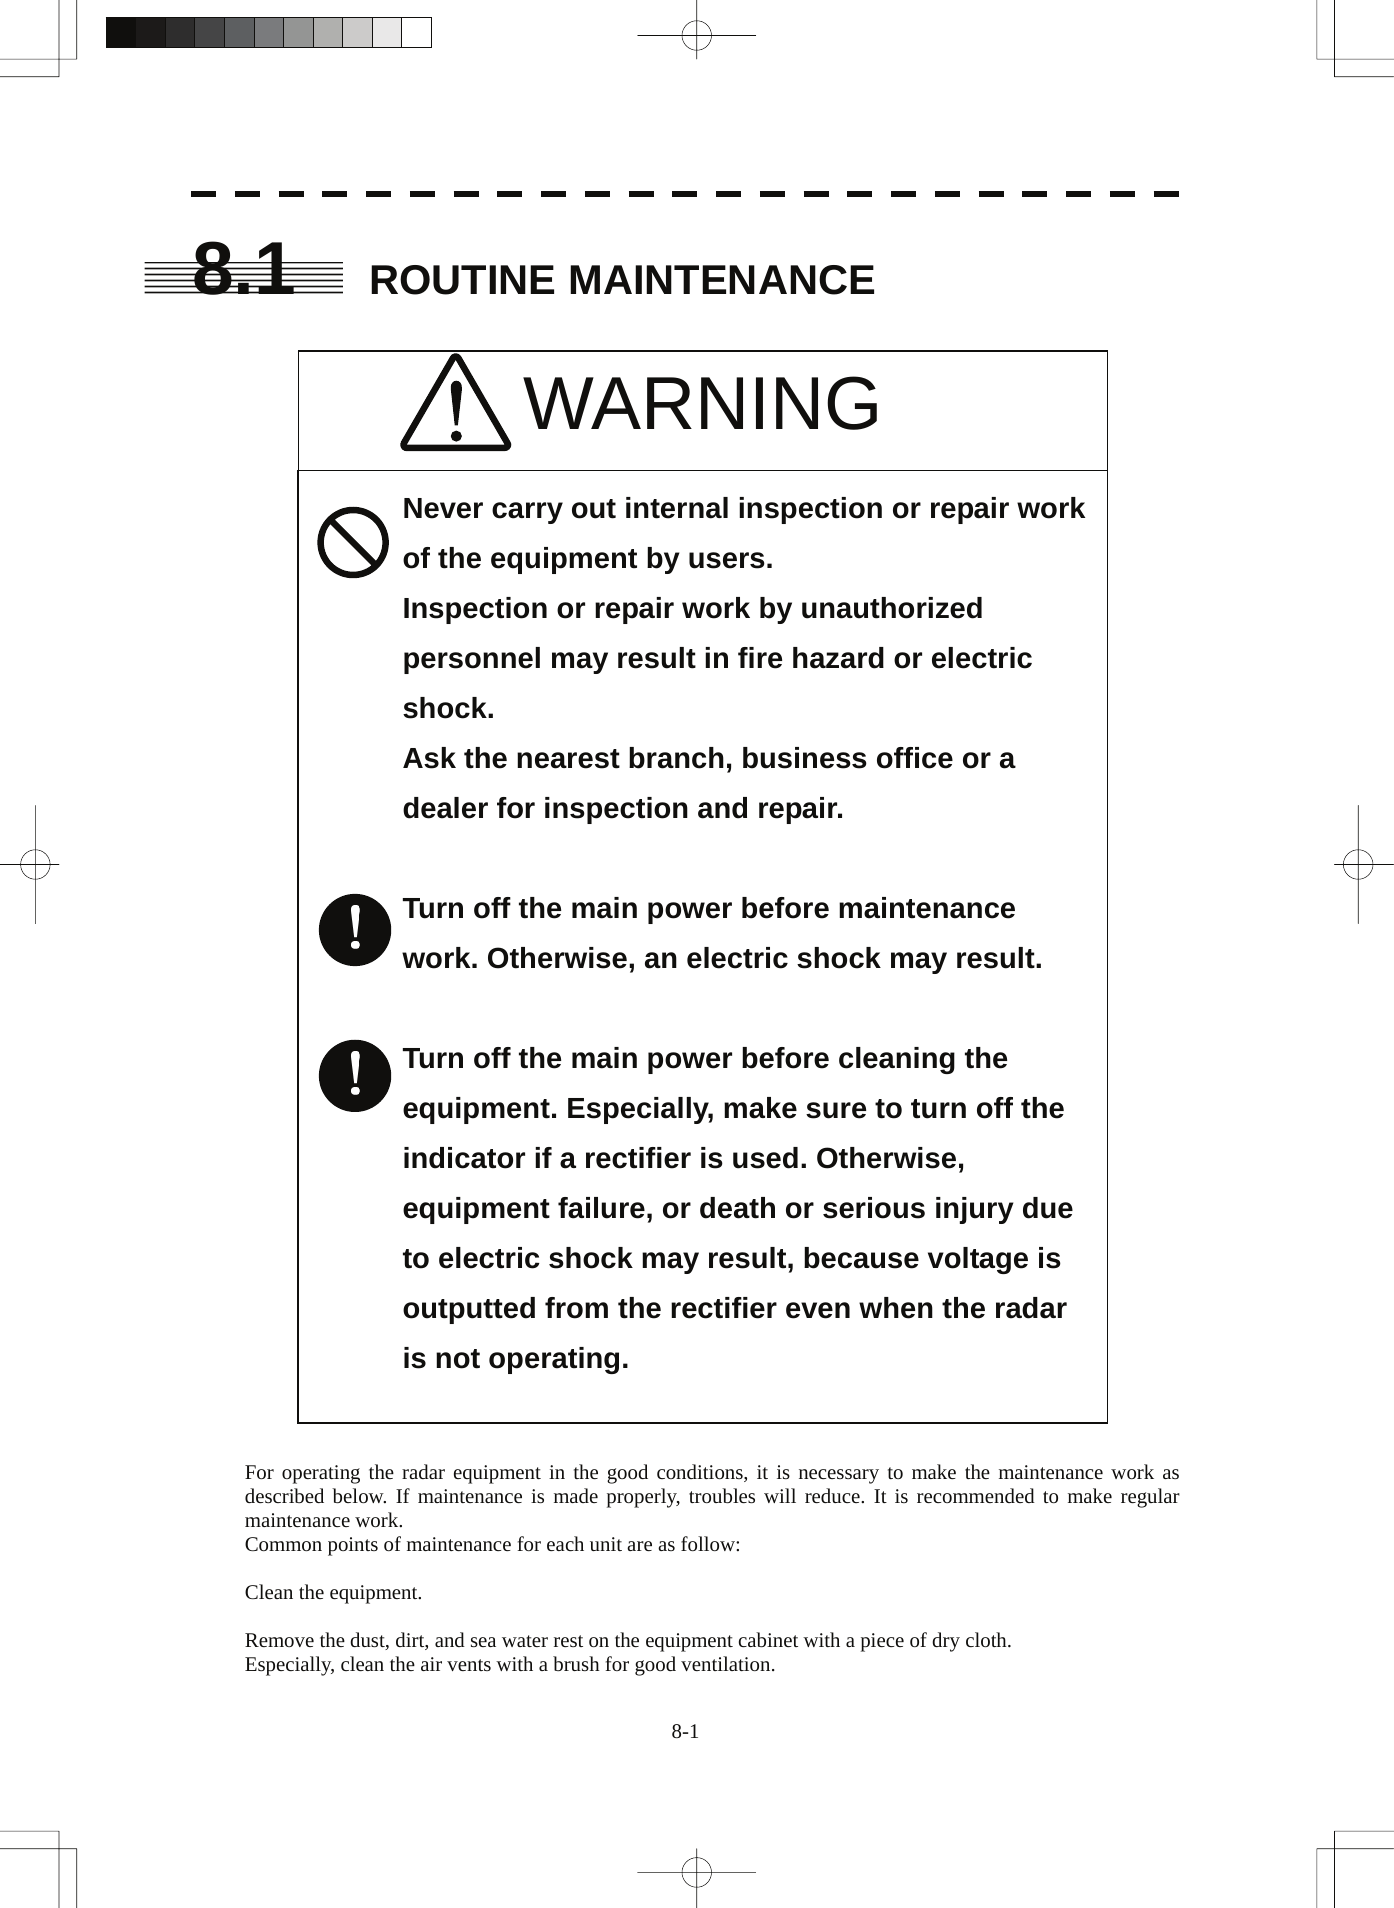  8.1 ROUTINE MAINTENANCE   WARNING      Never carry out internal inspection or repair work of the equipment by users. Inspection or repair work by unauthorized personnel may result in fire hazard or electric shock.         Ask the nearest branch, business office or a dealer for inspection and repair.        Turn off the main power before maintenance work. Otherwise, an electric shock may result.       Turn off the main power before cleaning the equipment. Especially, make sure to turn off the indicator if a rectifier is used. Otherwise, equipment failure, or death or serious injury due to electric shock may result, because voltage is outputted from the rectifier even when the radar is not operating.               For operating the radar equipment in the good conditions, it is necessary to make the maintenance work as described below. If maintenance is made properly, troubles will reduce. It is recommended to make regular maintenance work. Common points of maintenance for each unit are as follow:  Clean the equipment.  Remove the dust, dirt, and sea water rest on the equipment cabinet with a piece of dry cloth. Especially, clean the air vents with a brush for good ventilation. 8-1 